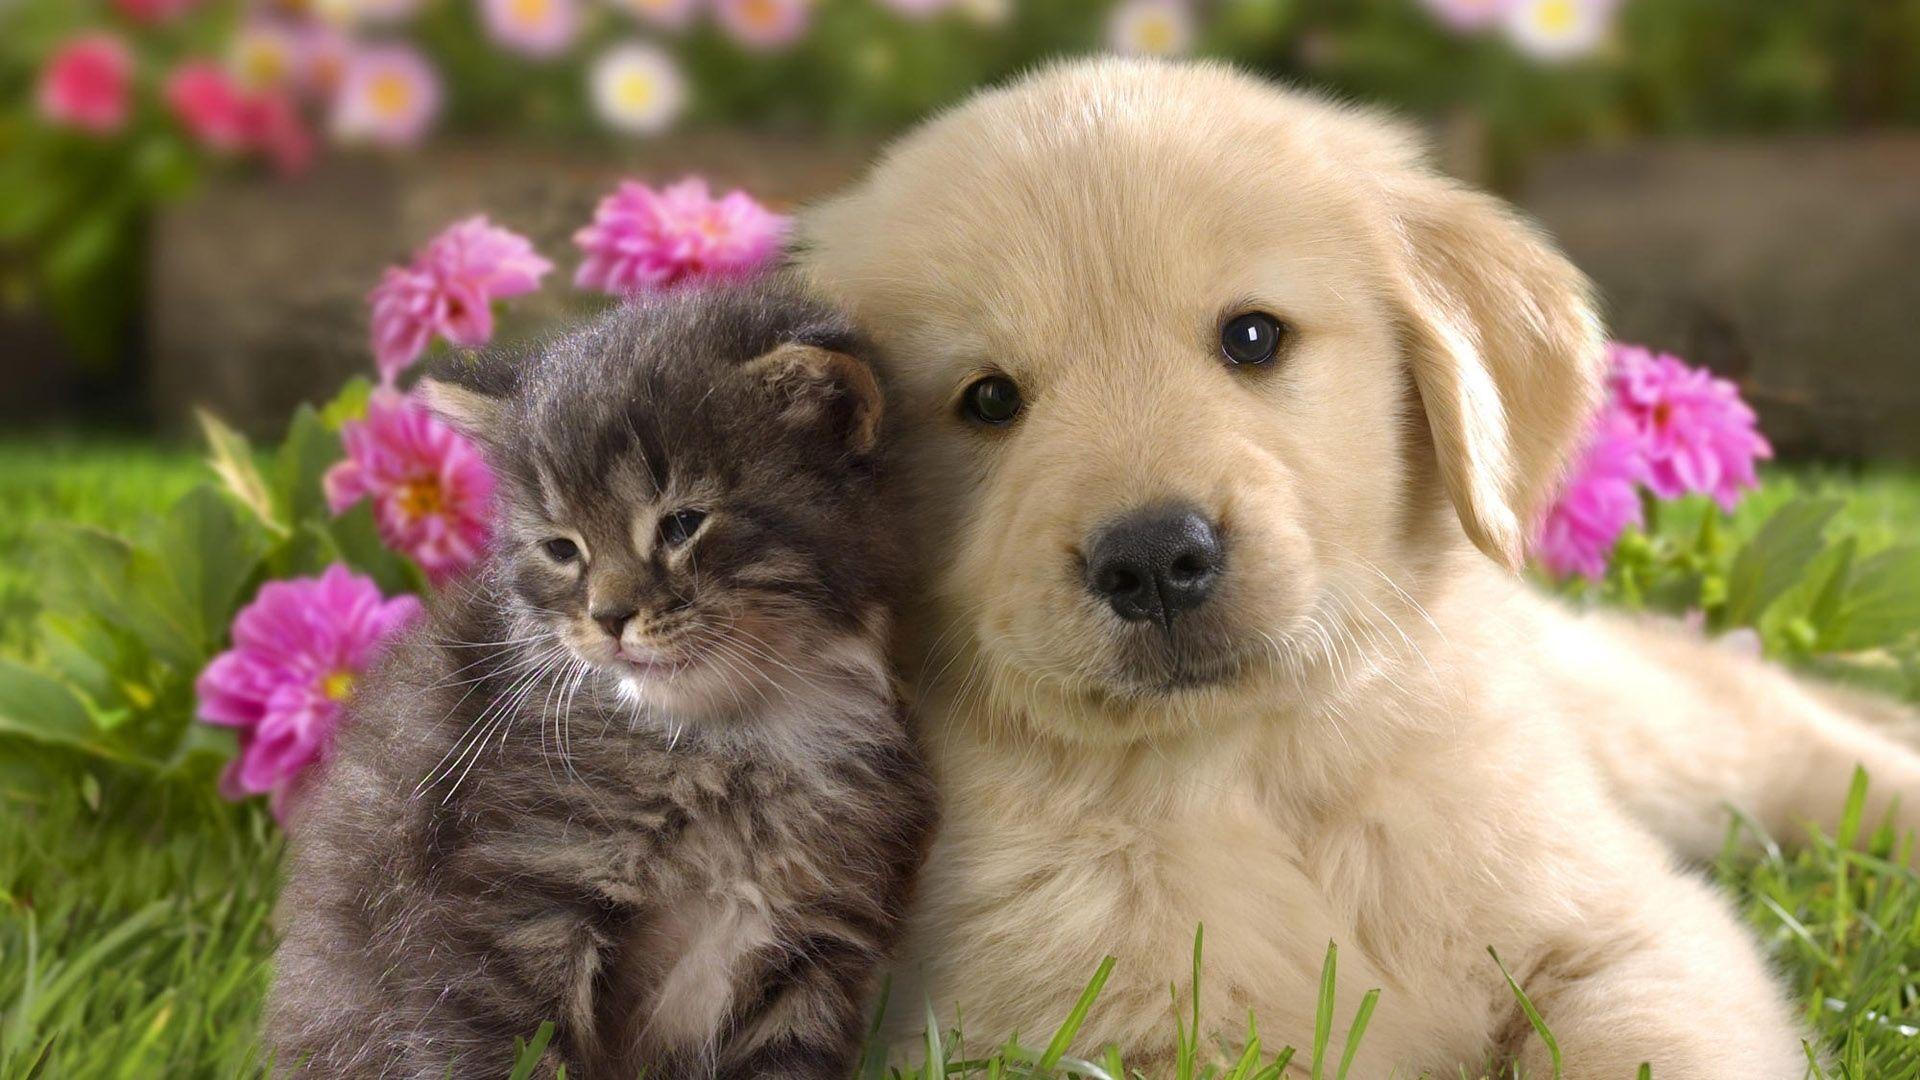 Full HD For Puppy Image Wallpaper Pics Mobile